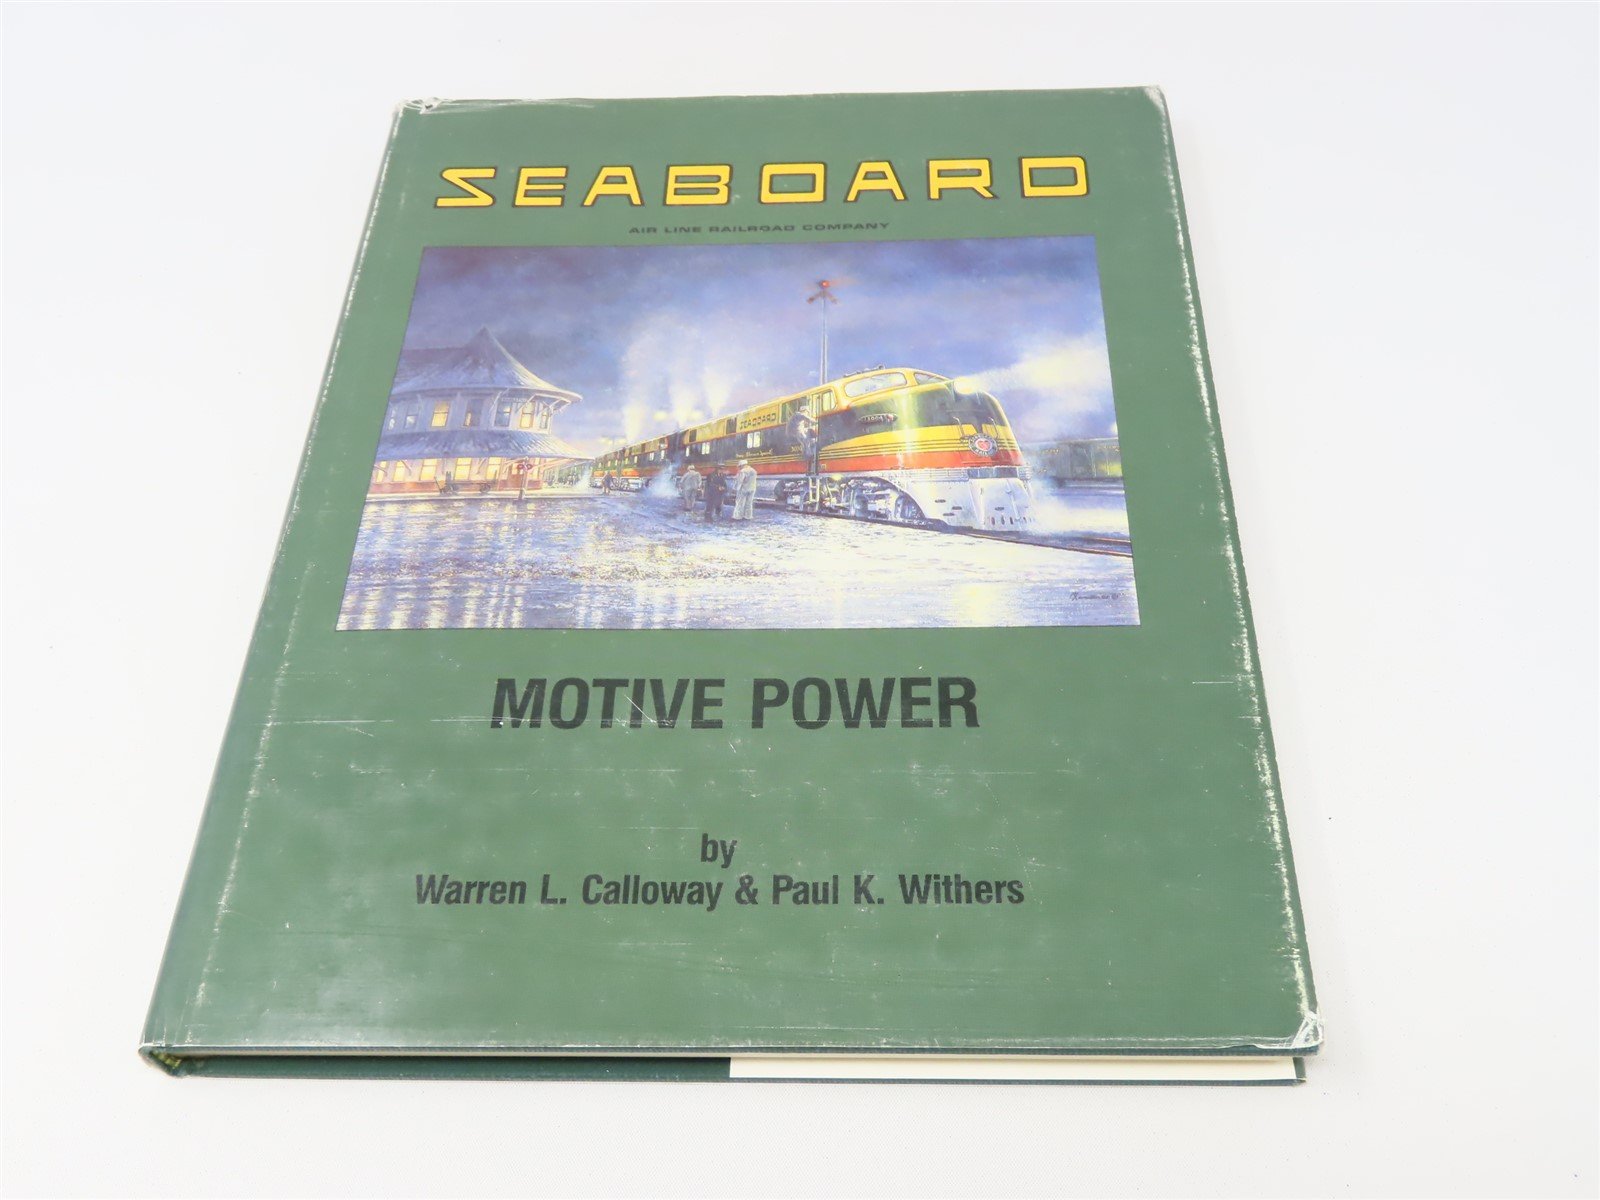 Seaboard Air Line Railroad Company Motive Power by Calloway & Withers ©1988 HC